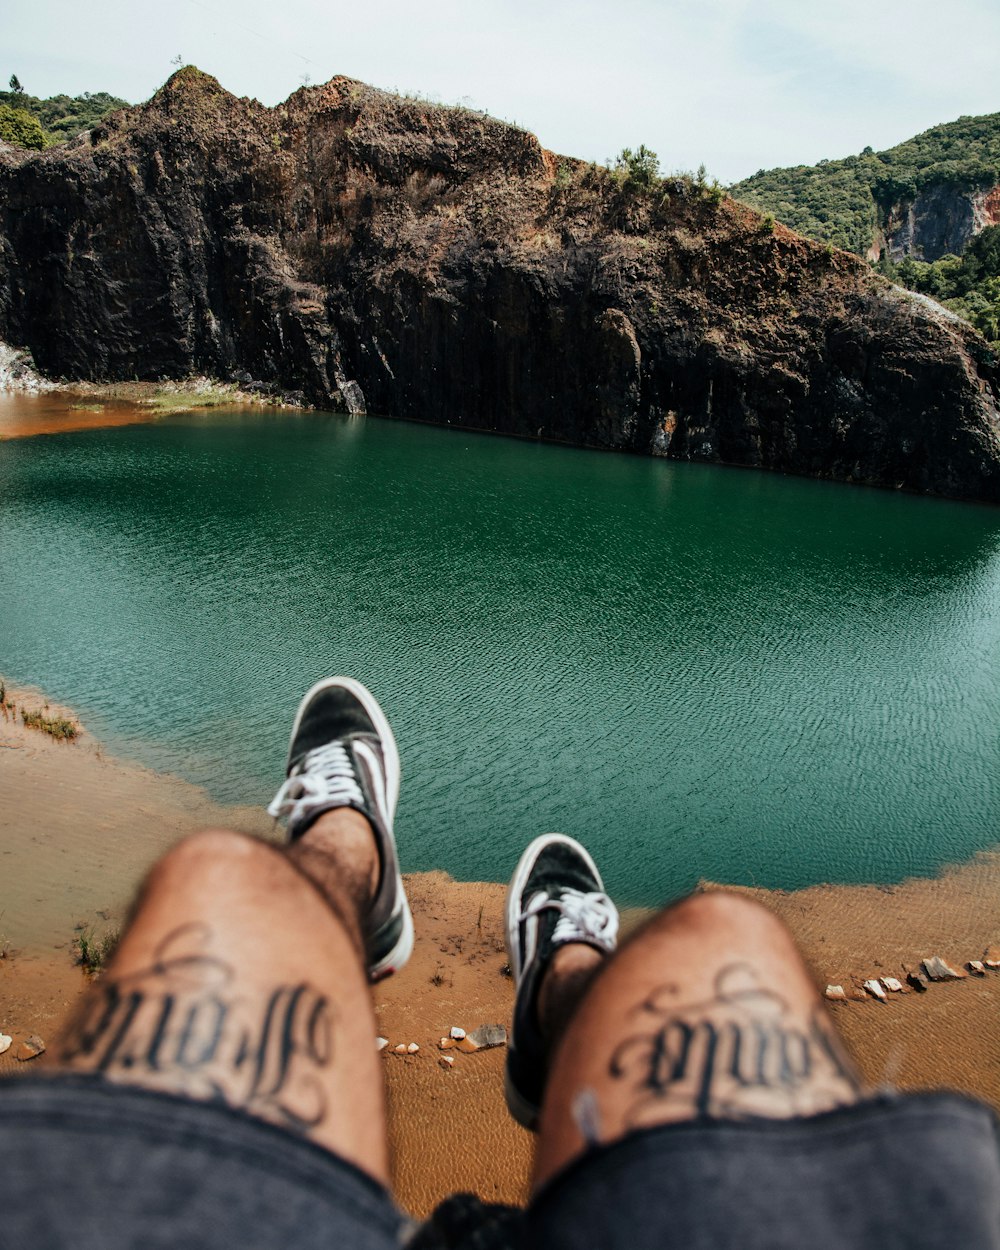 a person with their feet up in front of a lake